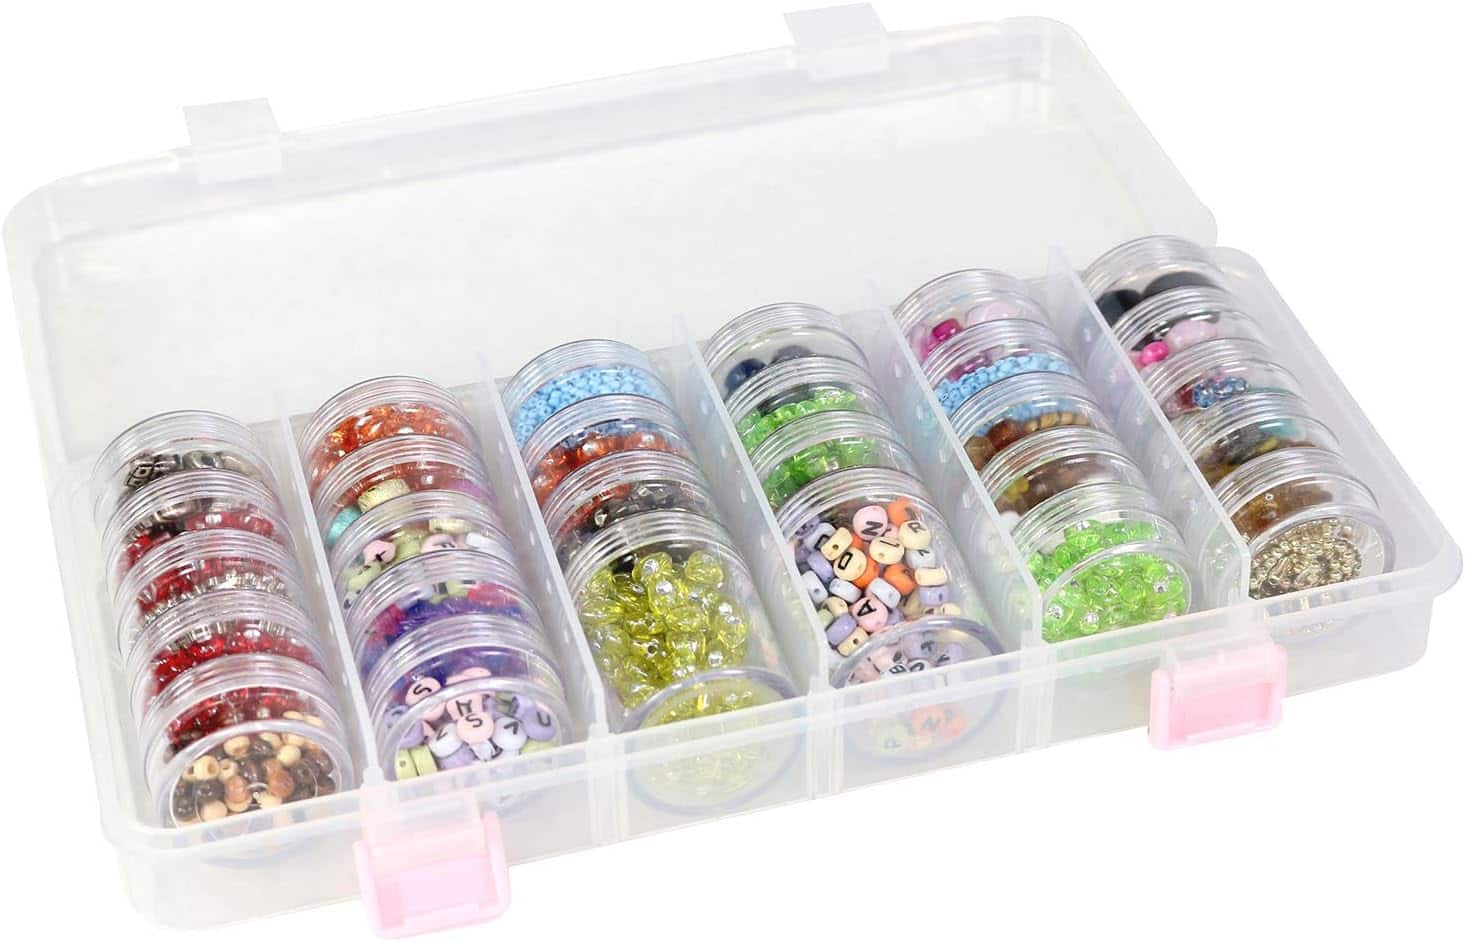  Amosfun 8 pcs transparent storage box bead storage containers  loose beads organizer necklace holder case earring storage bins with lids  craft storage containers charm travel pp components